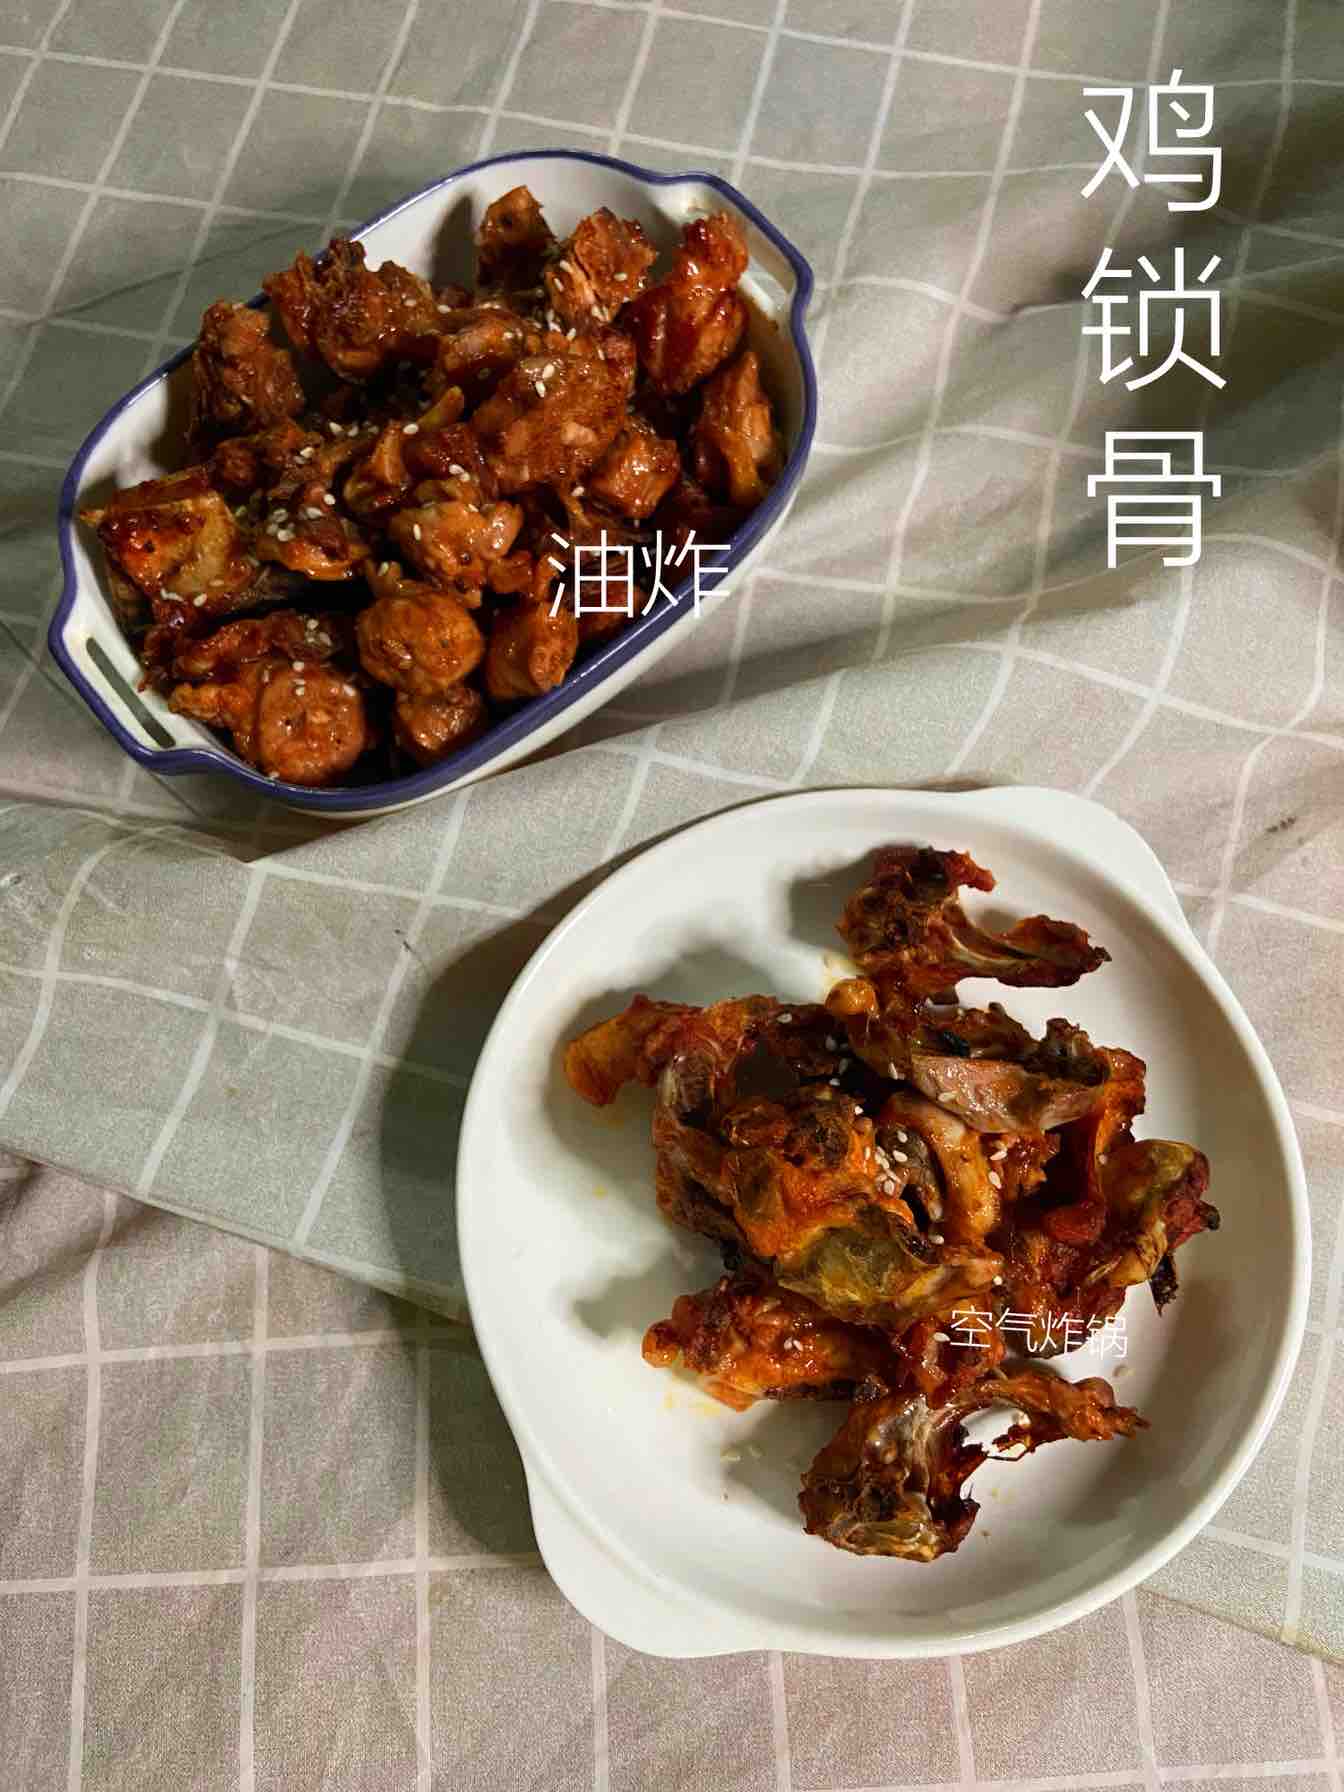 Copy Net Red Snacks~~ Fried Chicken Clavicle